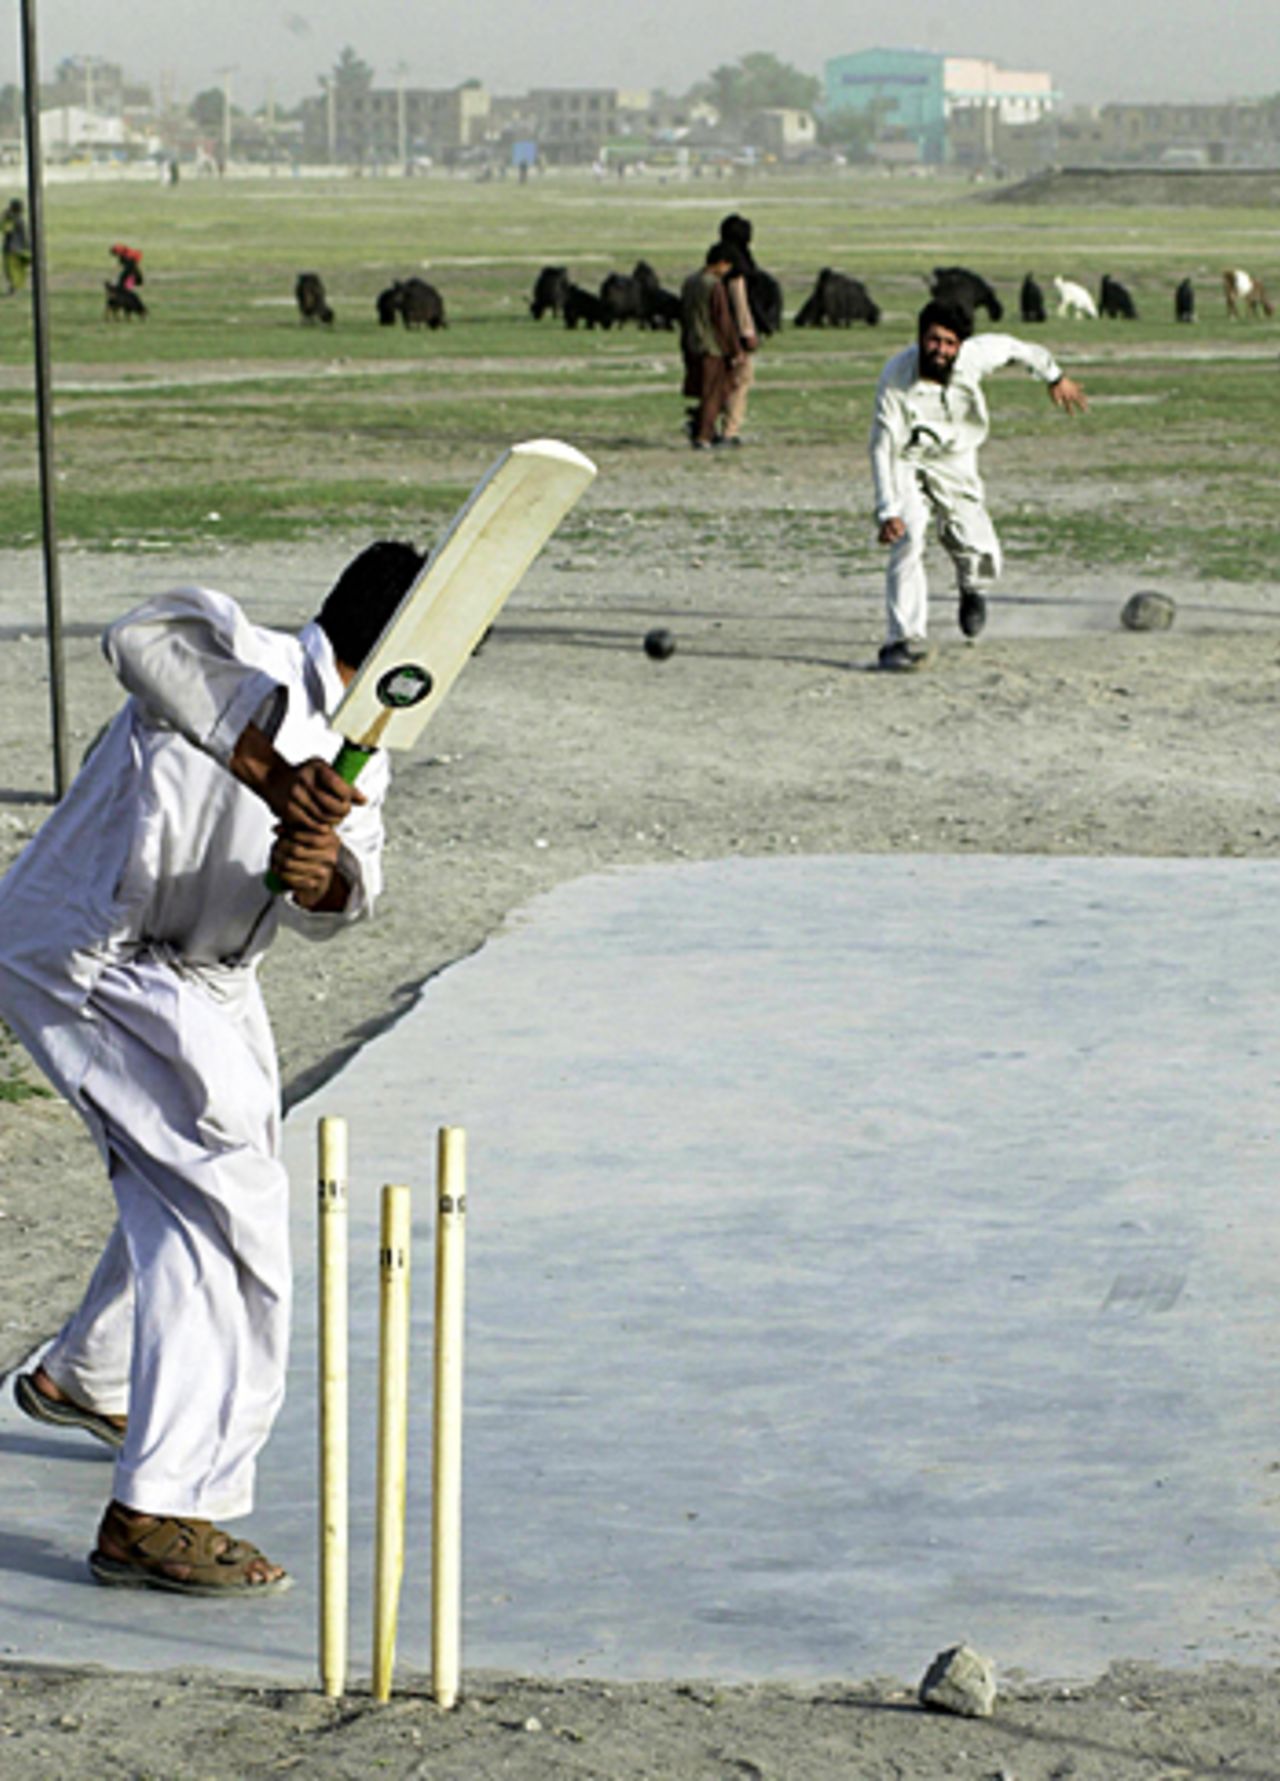 Afghan men wearing white shalwar kameez play cricket on a newly-laid pitch outside Kabul Stadium, Afghanistan, December 15, 2005